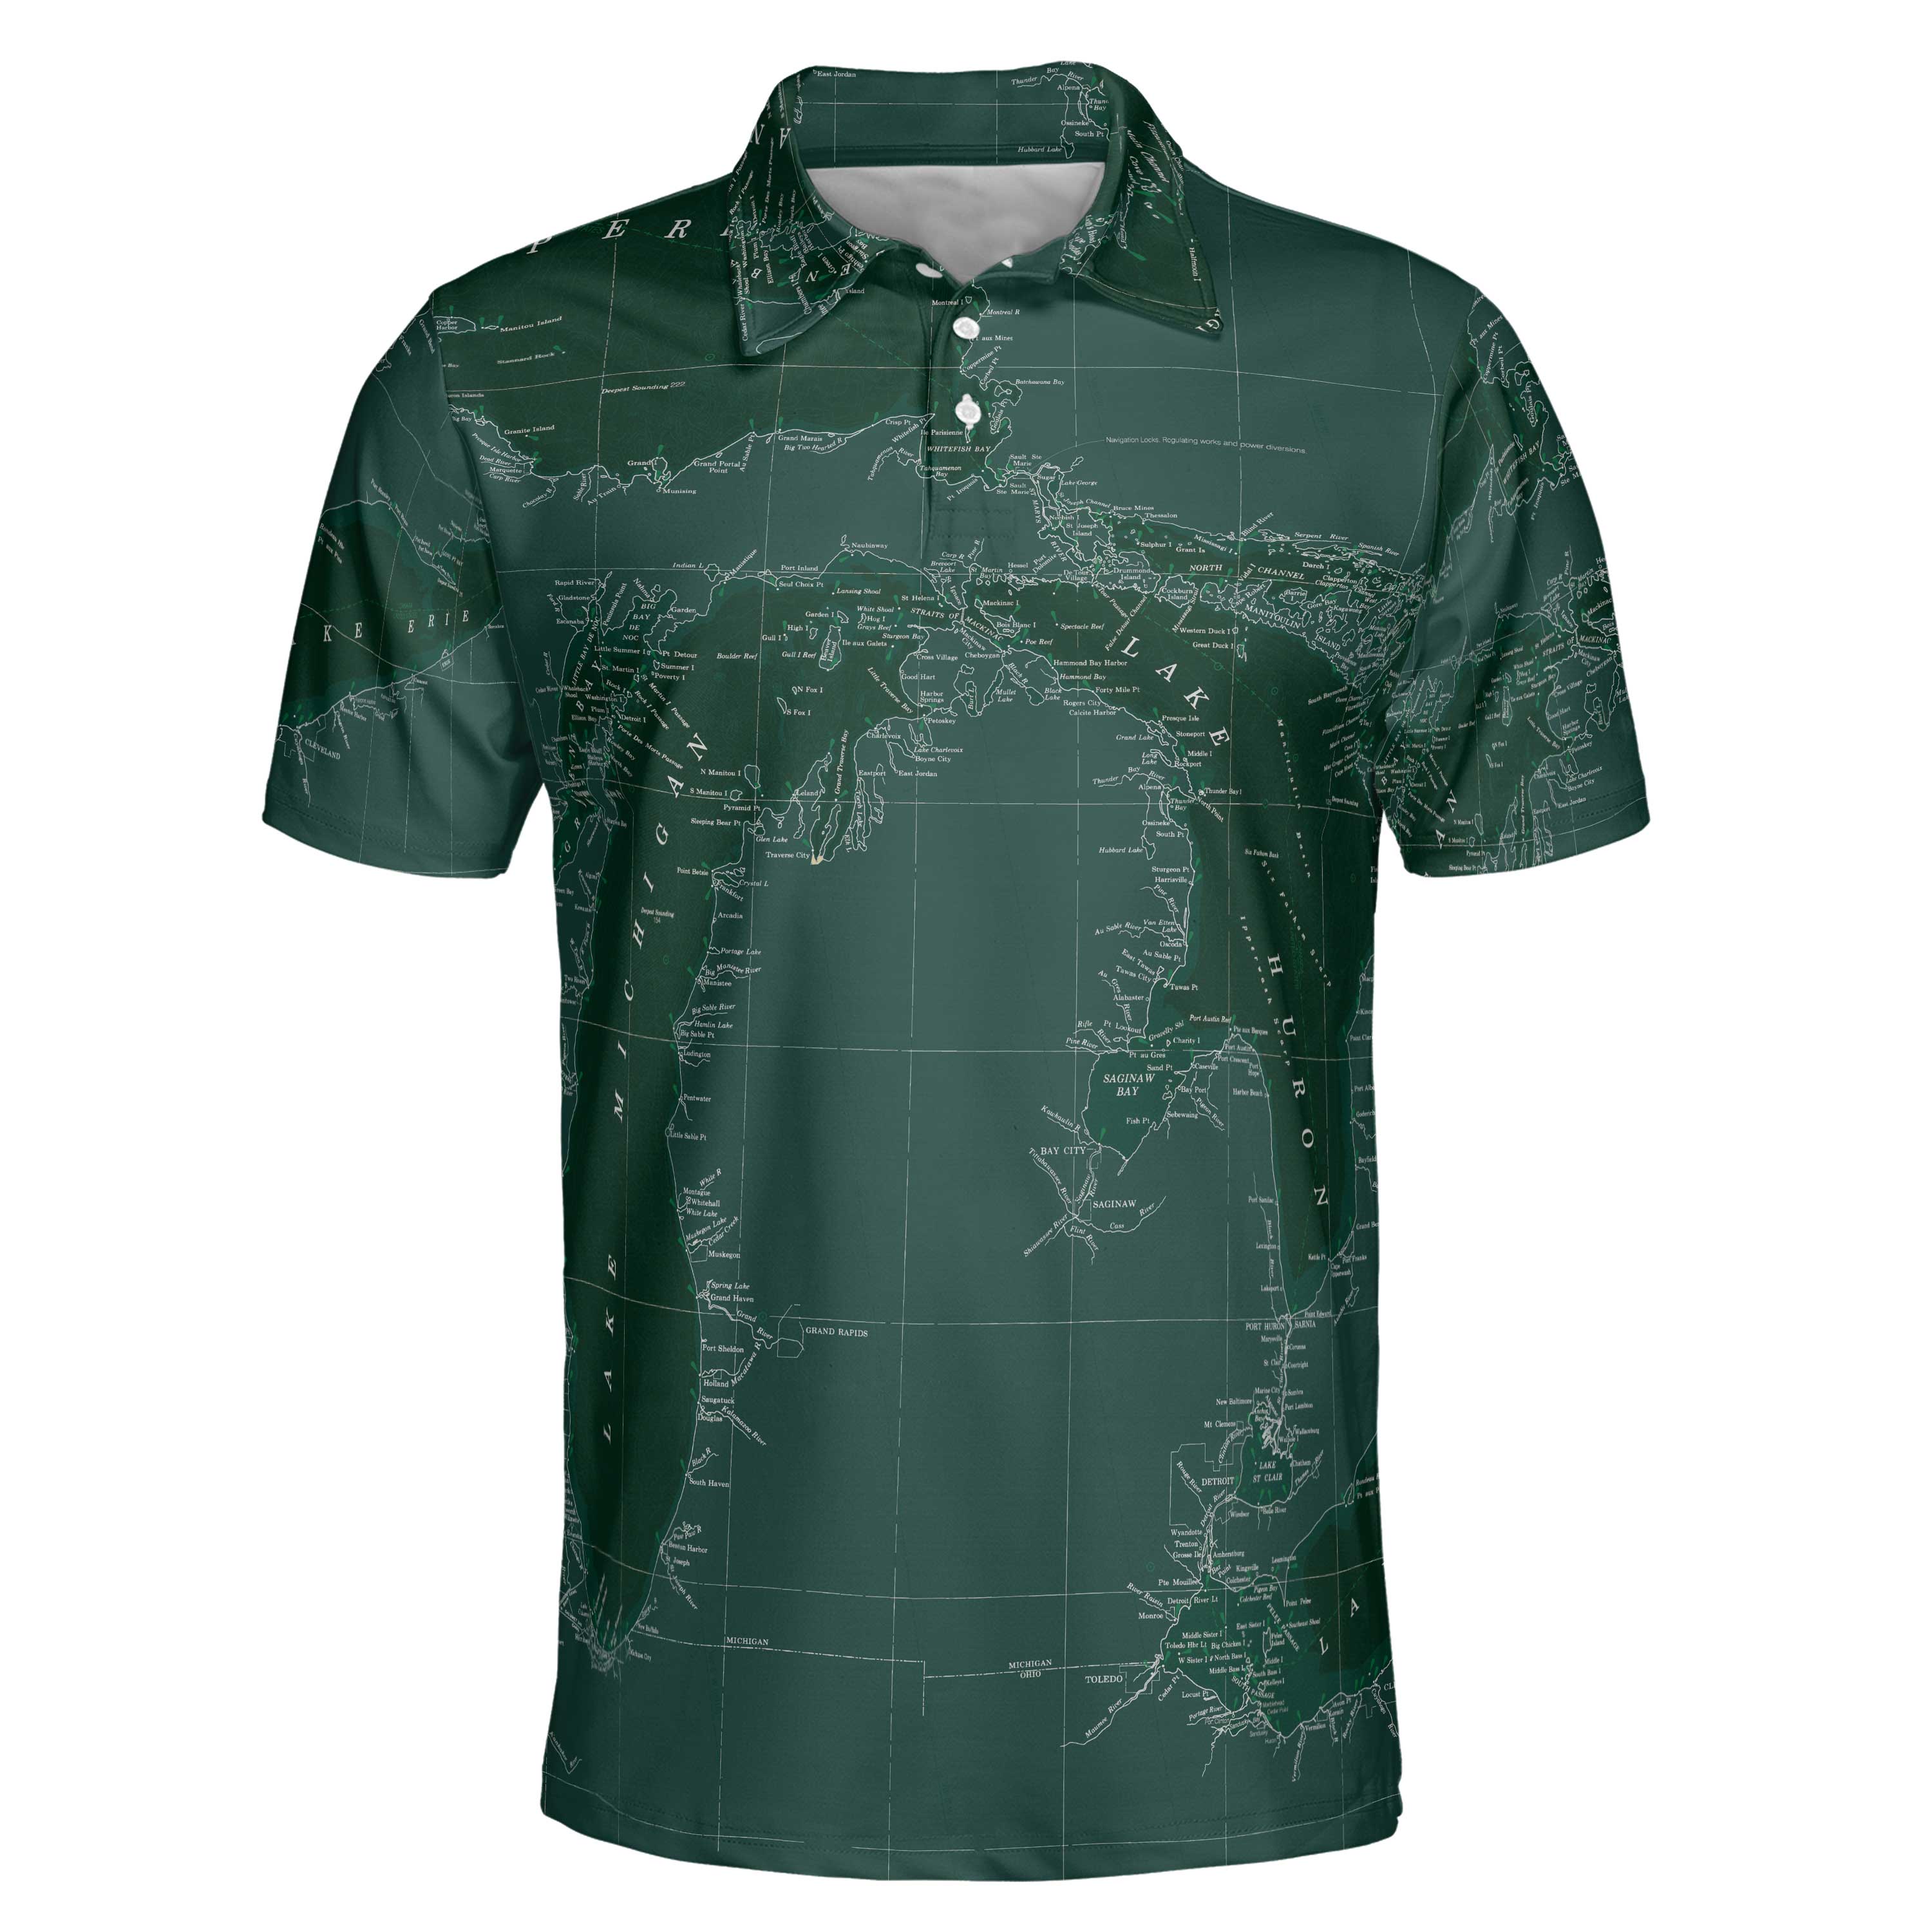 The Great Lakes Green and White Polo Shirt